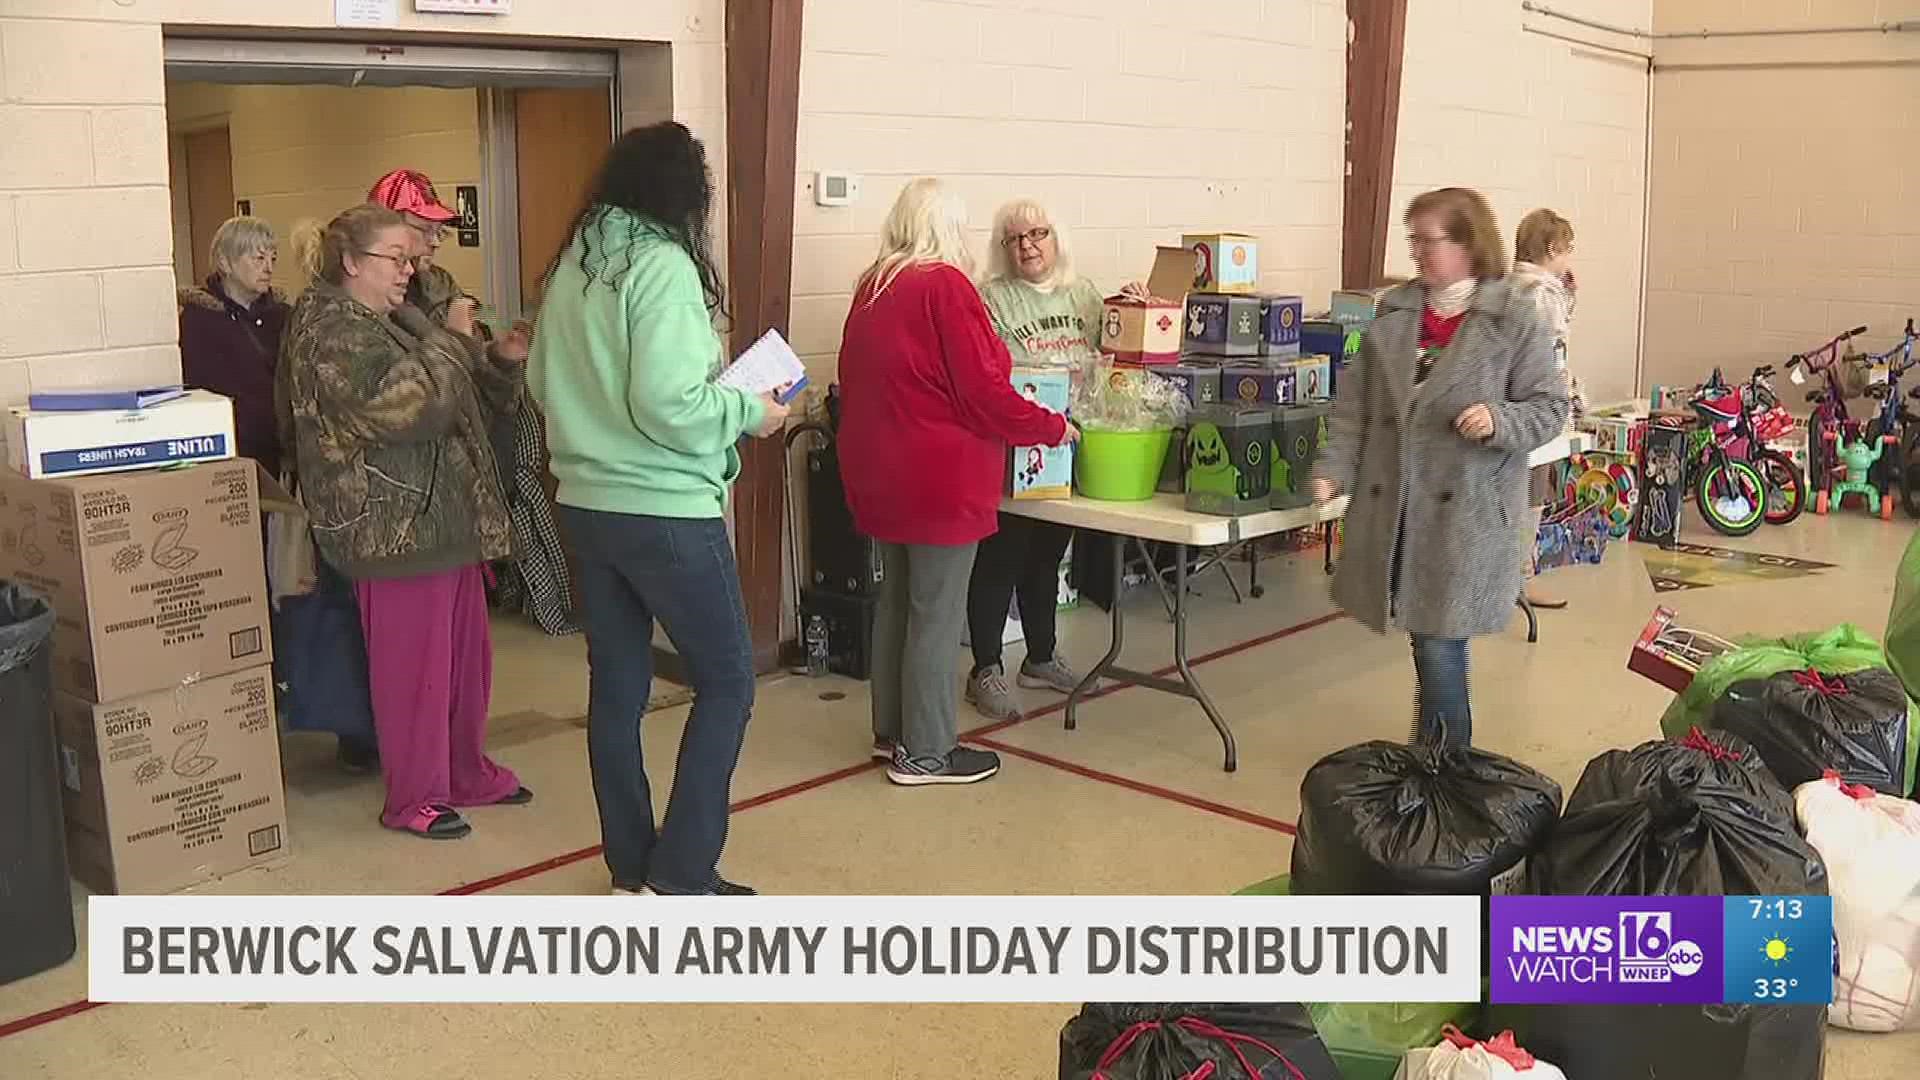 Christmas can be a tough time of year for some families, but organizations like the Salvation Army aim to help.